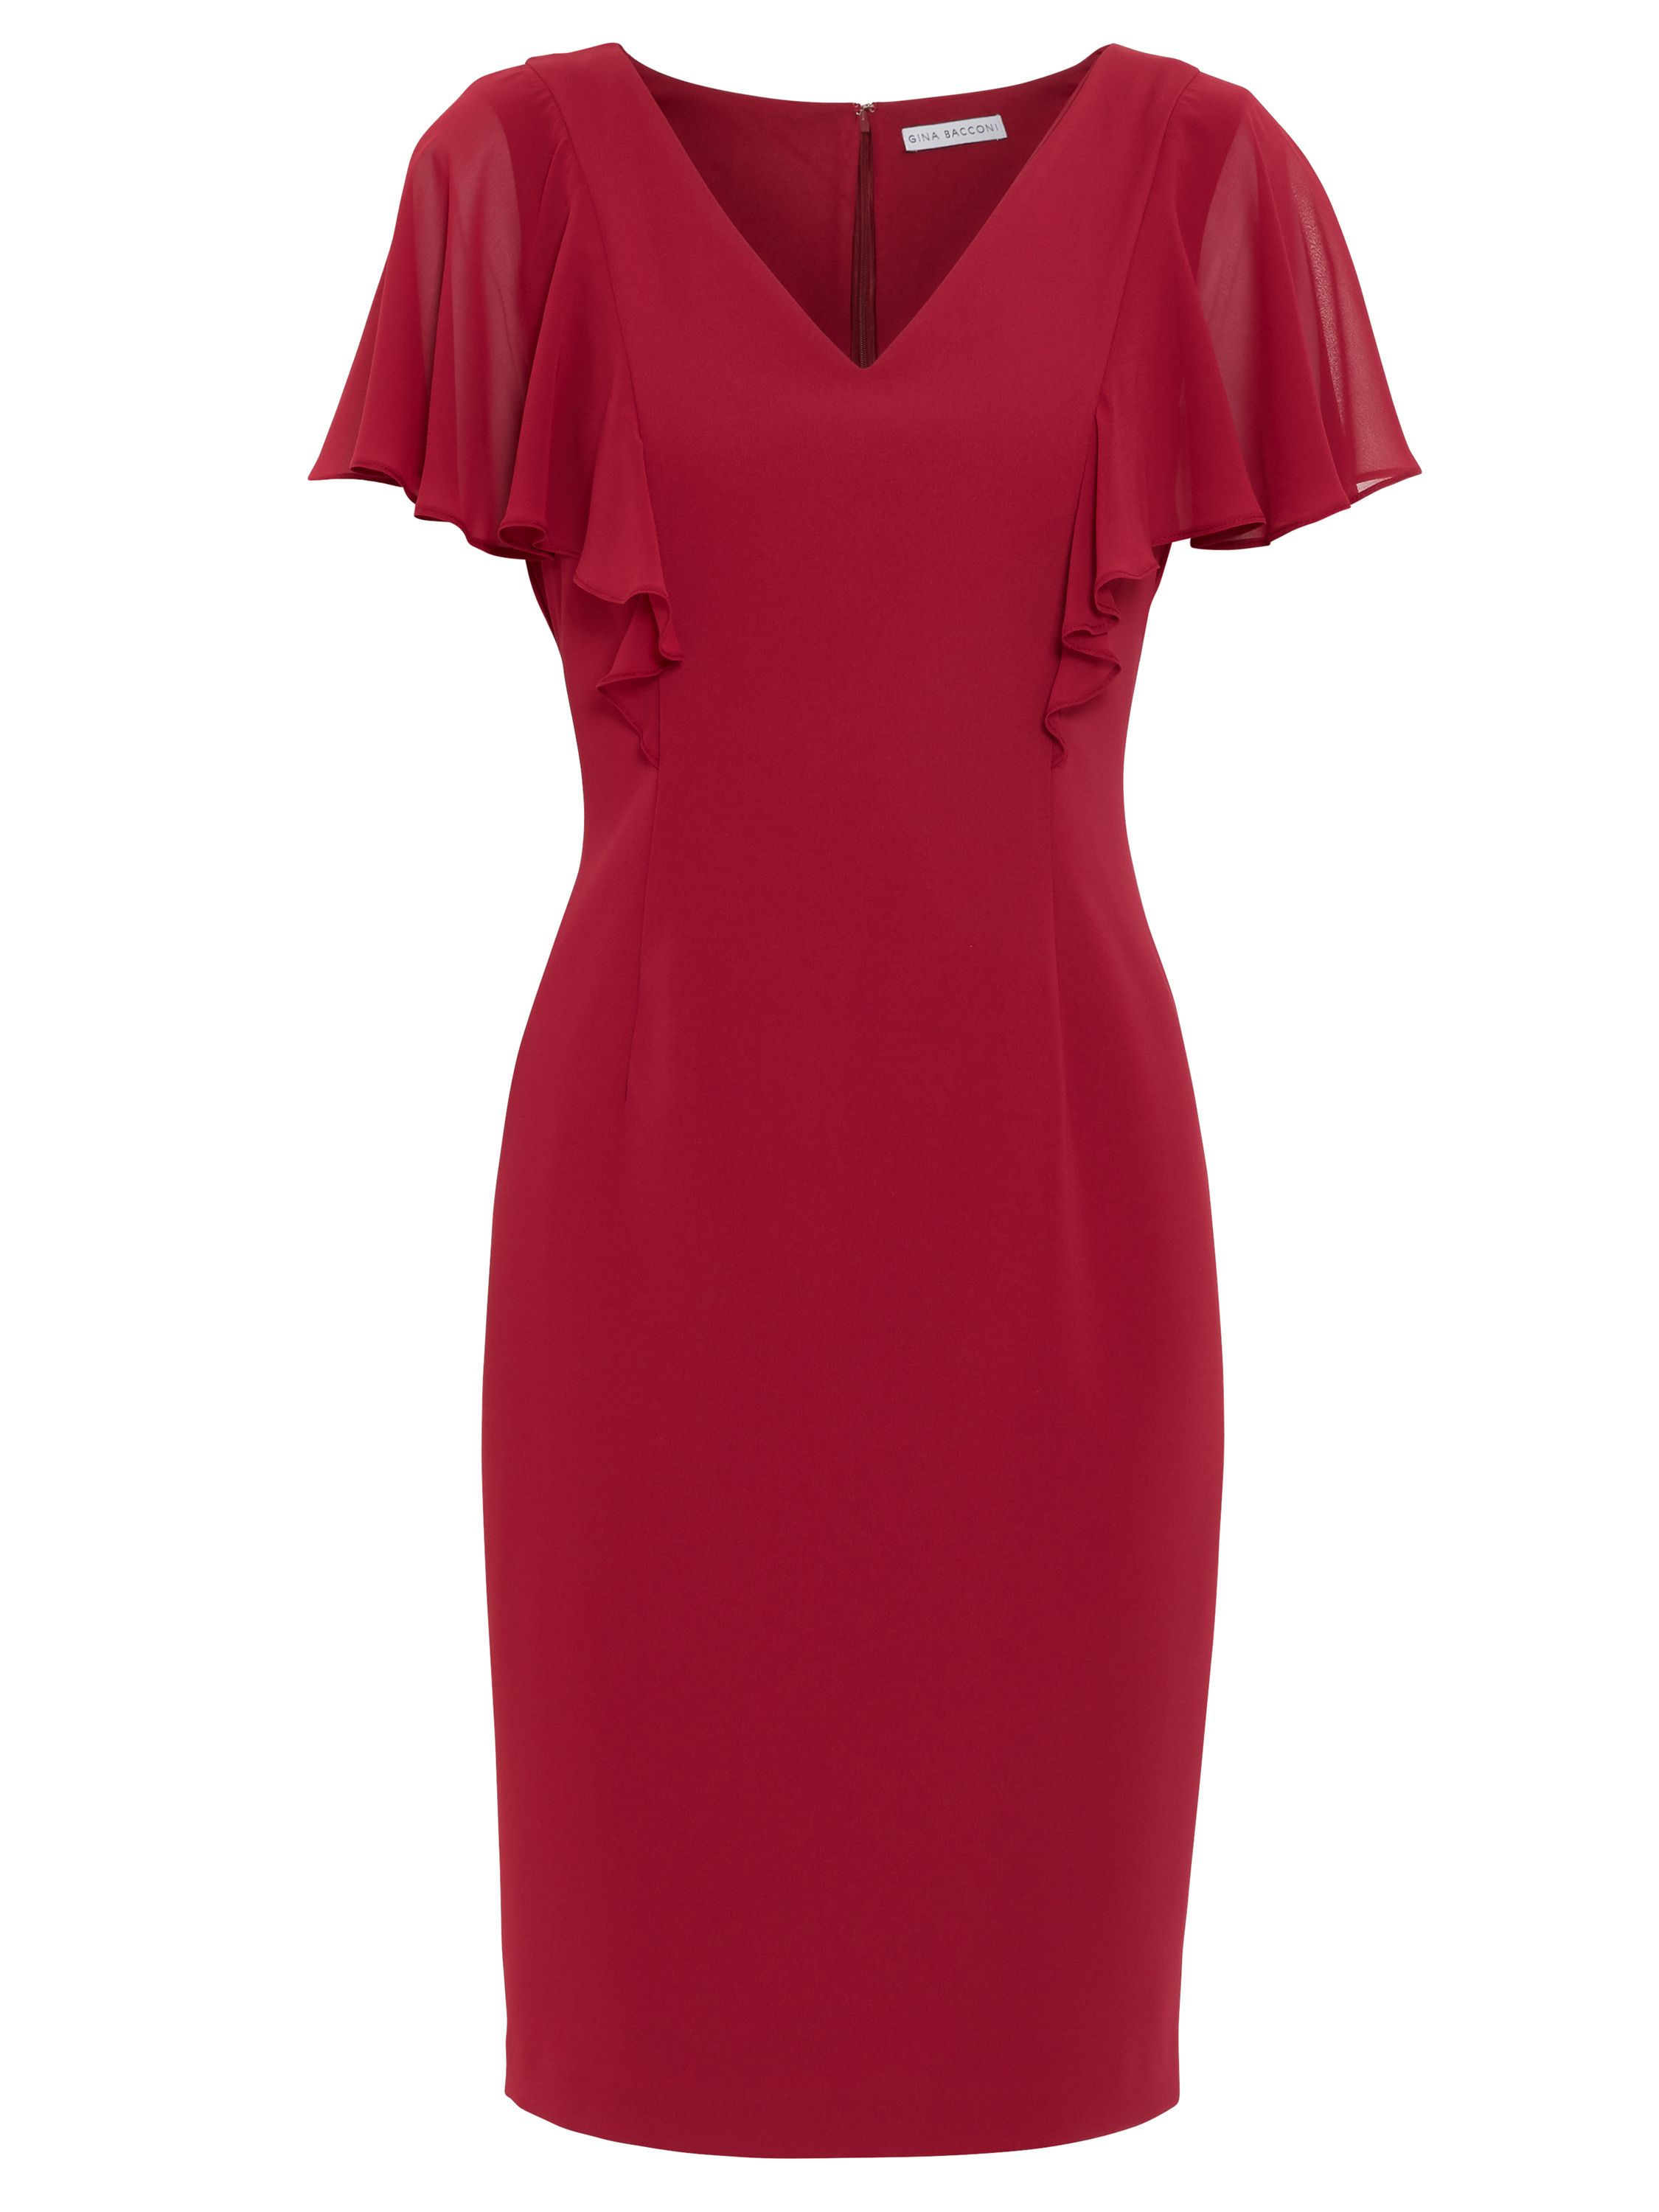 Add this frill dress by Gina Bacconi to your partywear wardrobe this season. This classic and versatile shift dress shape is fashioned from moss crepe. The dress is overlaid with elegant chiffon sleeves.The dress is lined and fastens with a zip and a button at the back of the neck.